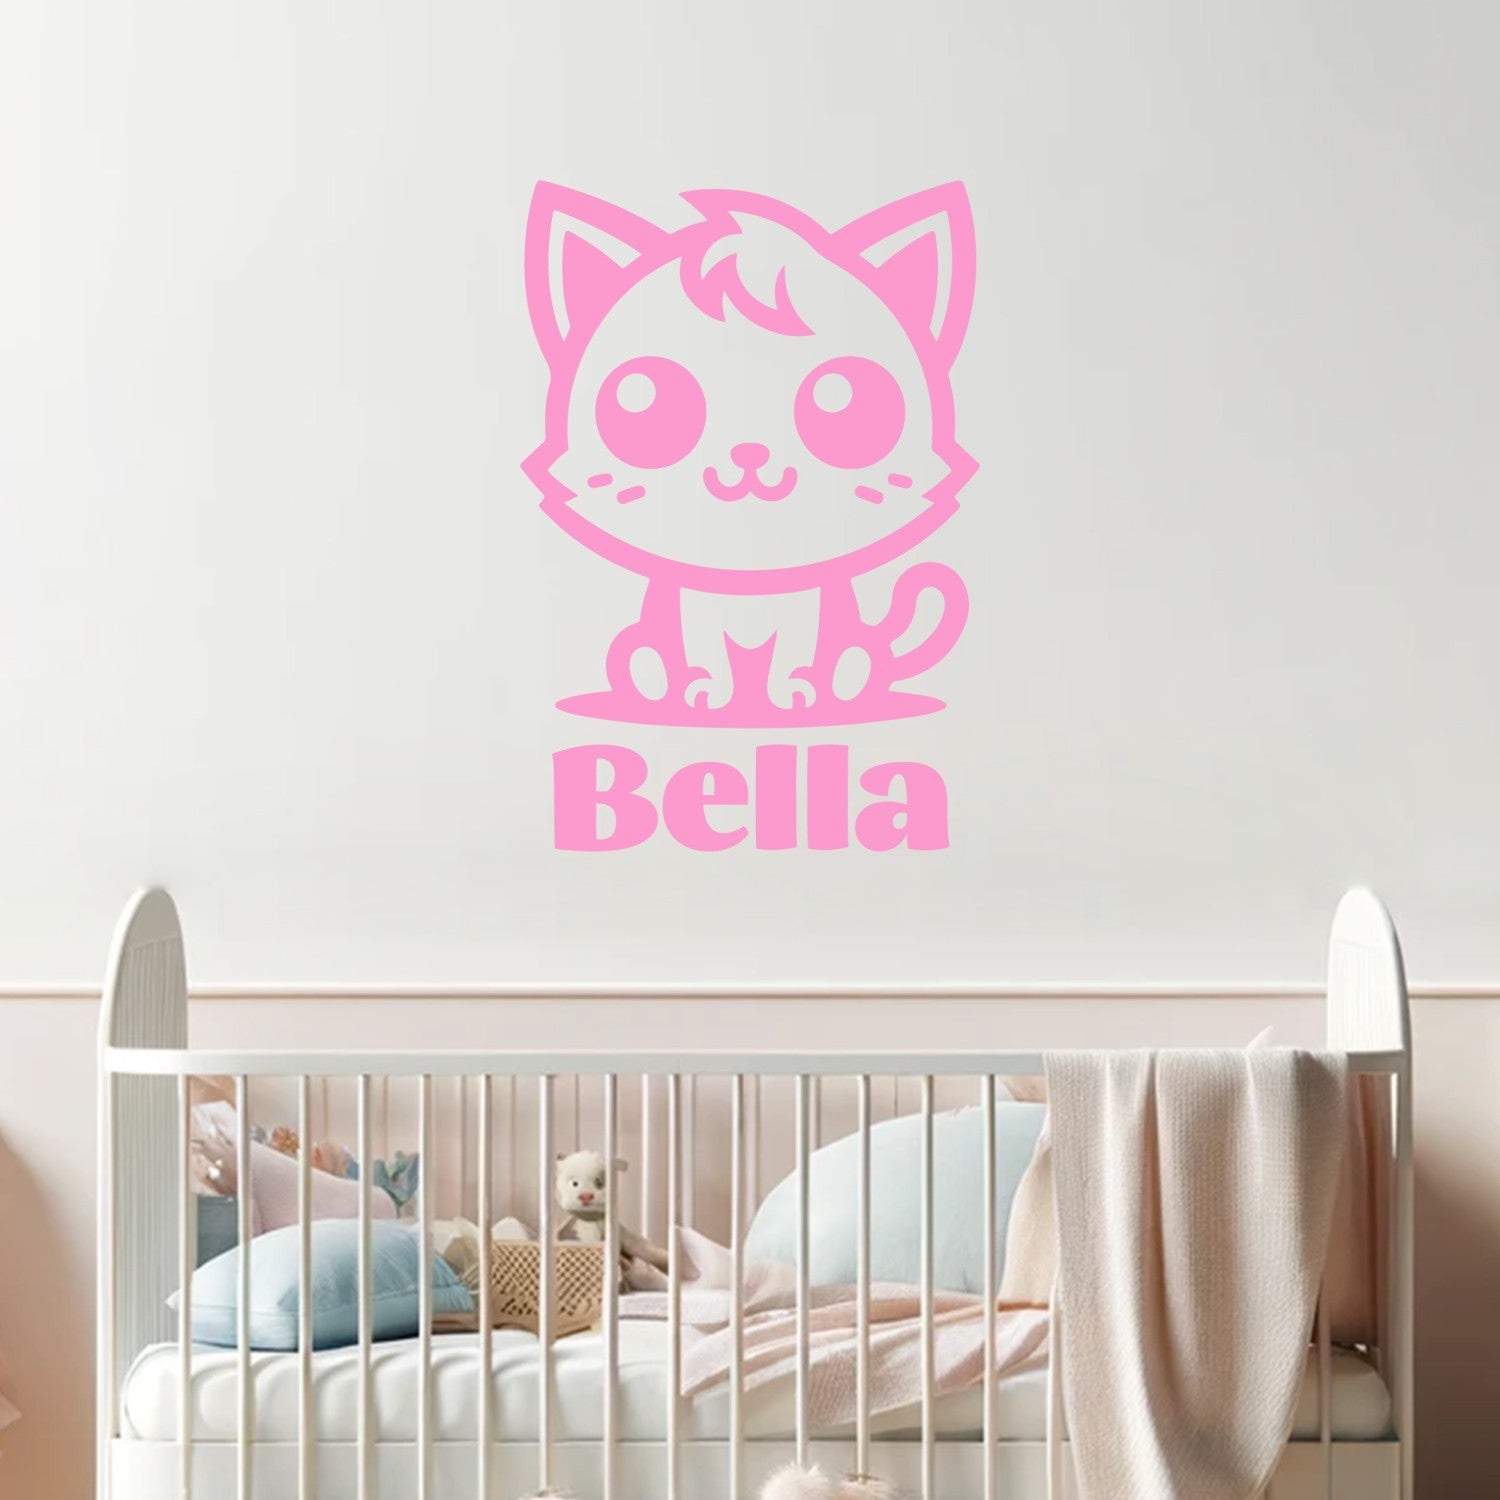 Elephant Wall Stickers - Customizable Animal Wall Decals - Personalized Name Decal - Name Stickers for Wall - Baby Elephant Wall Decal